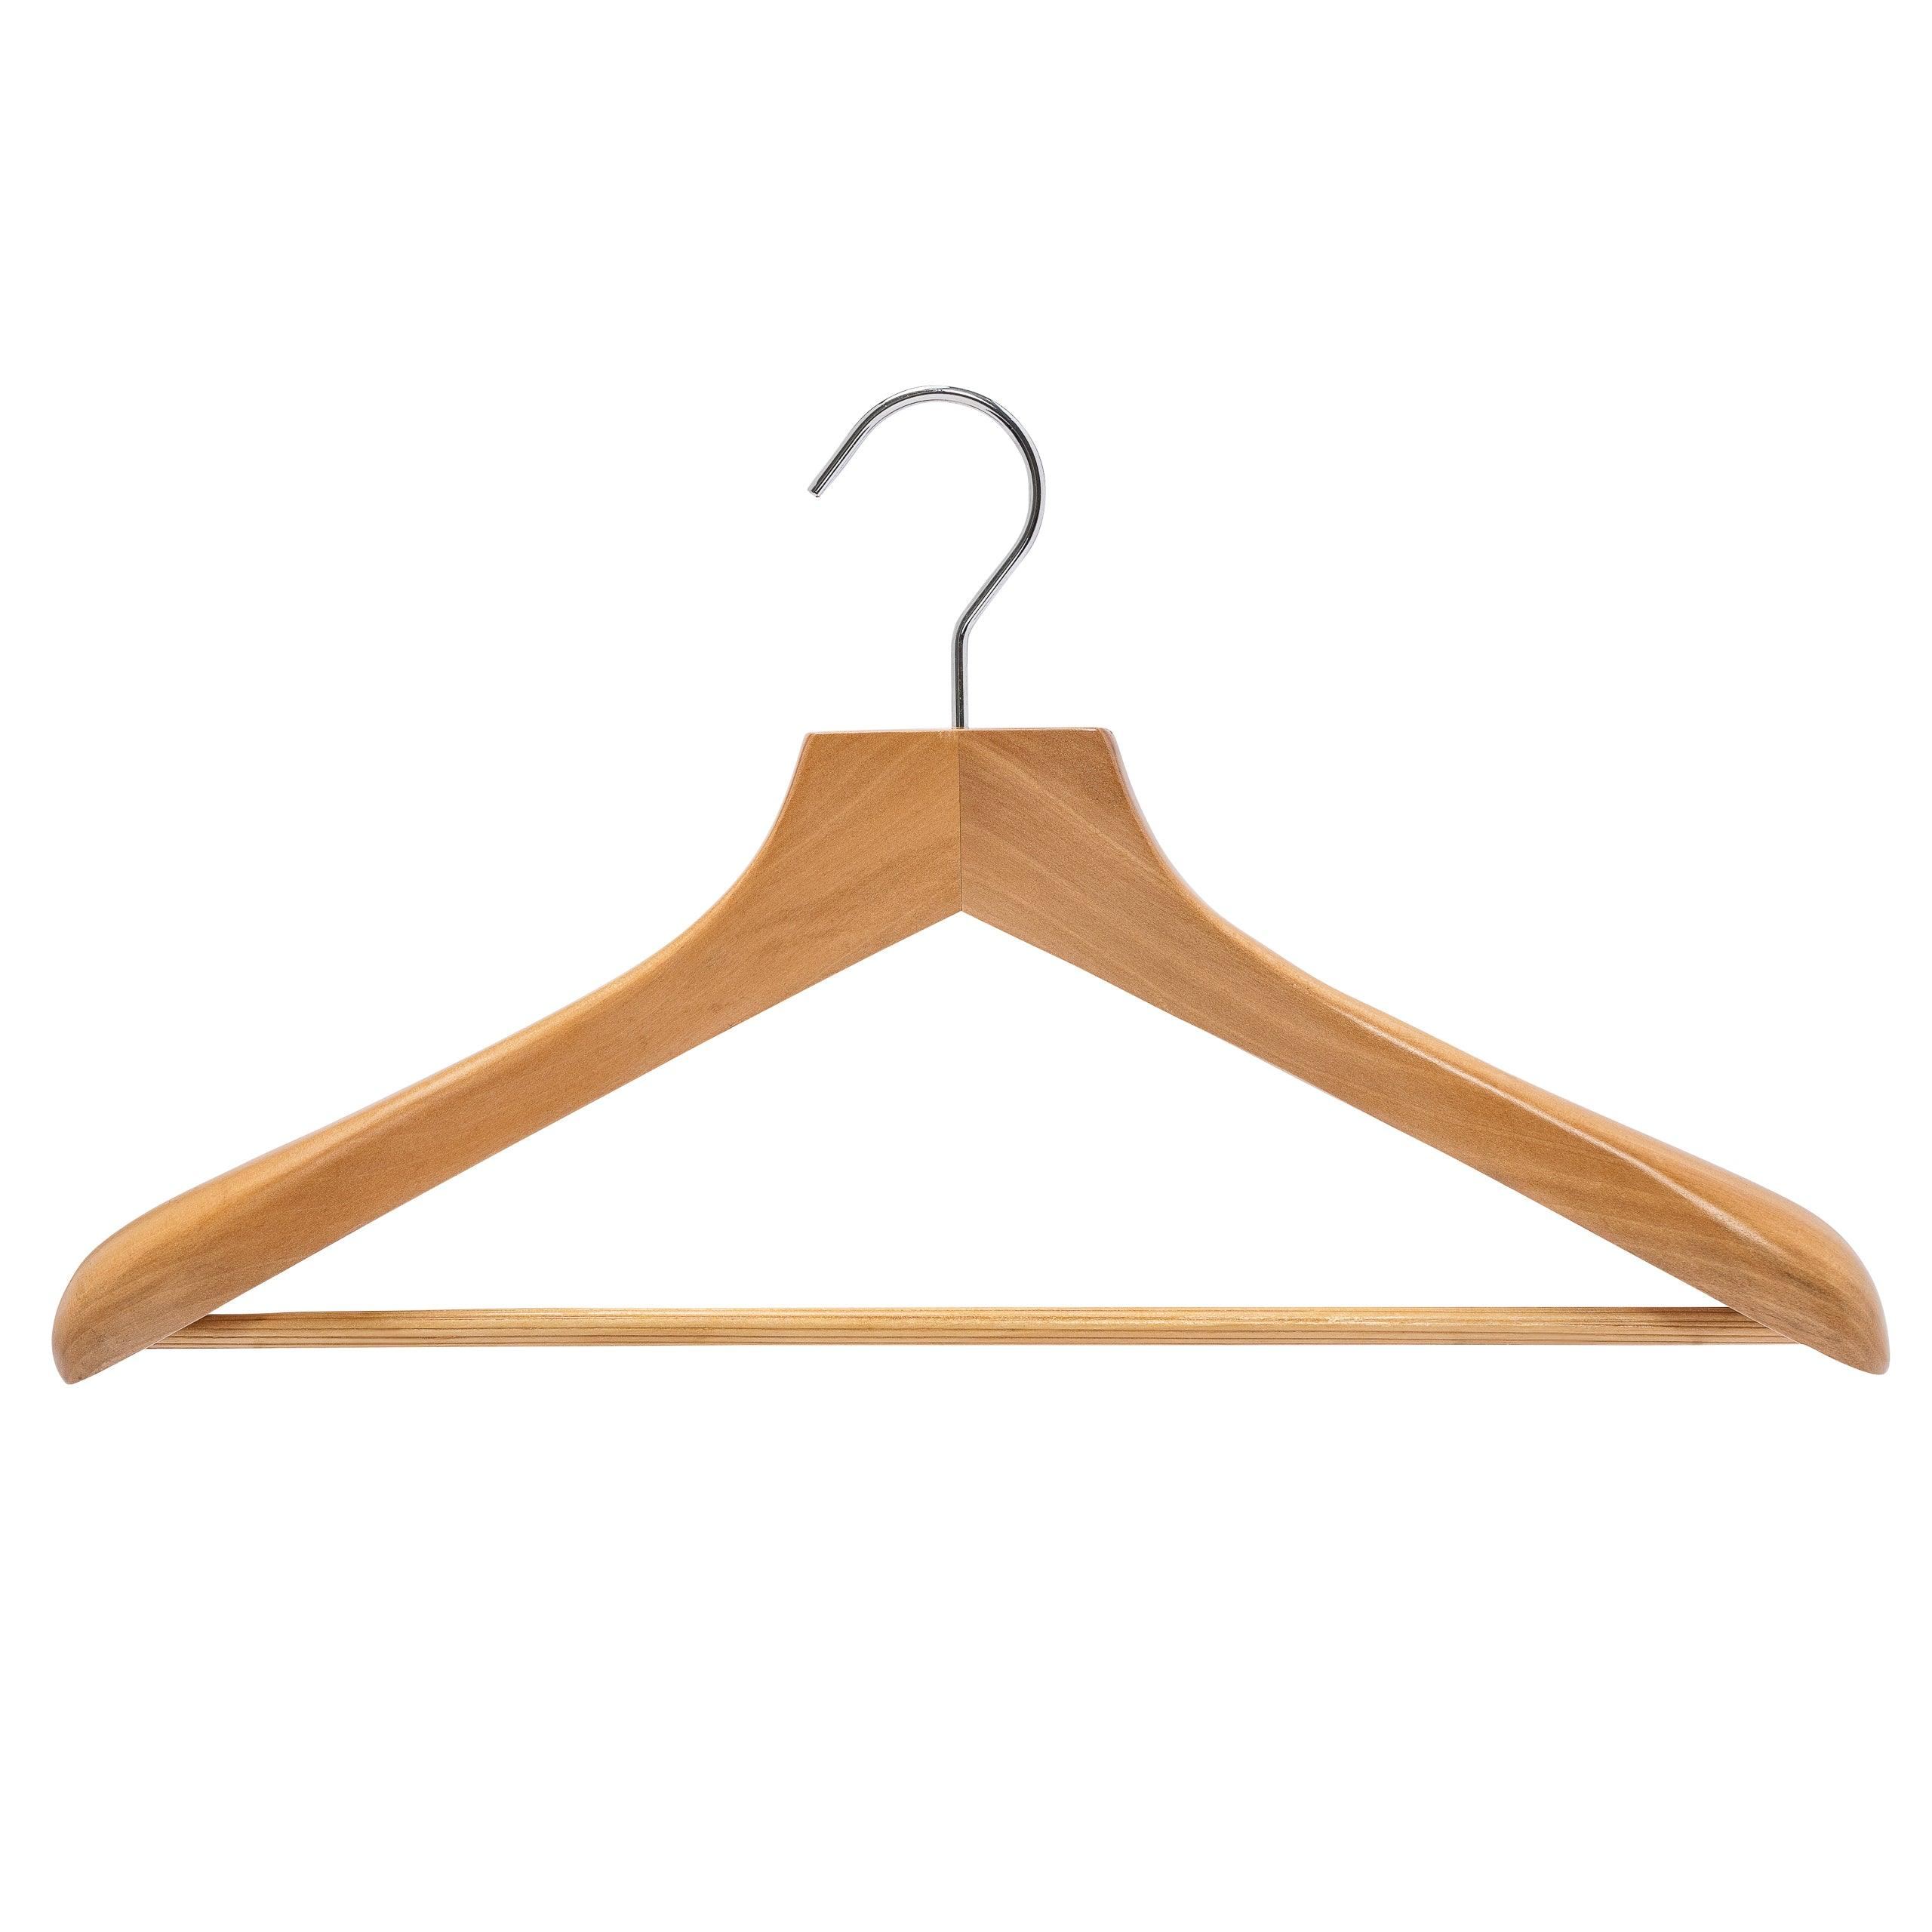 Frosted Timber Clip Pants Hangers 3 Pack White | Soko & Co